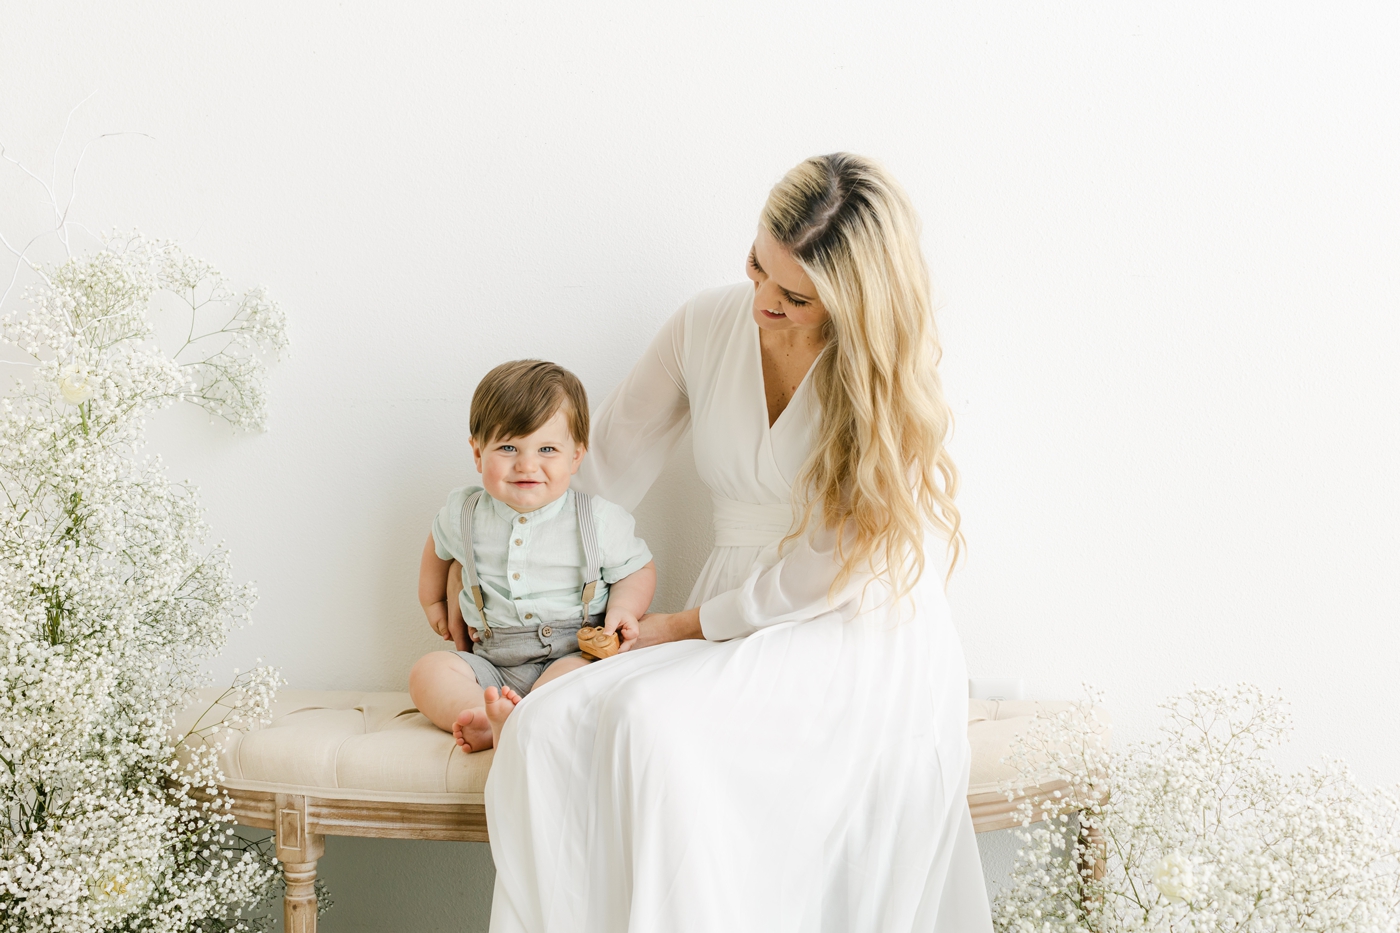 Mom sitting on bench with little boy, surrounded by baby's breath, during Motherhood portrait event in Austin, TX. Photo by Sana Ahmed Photography.